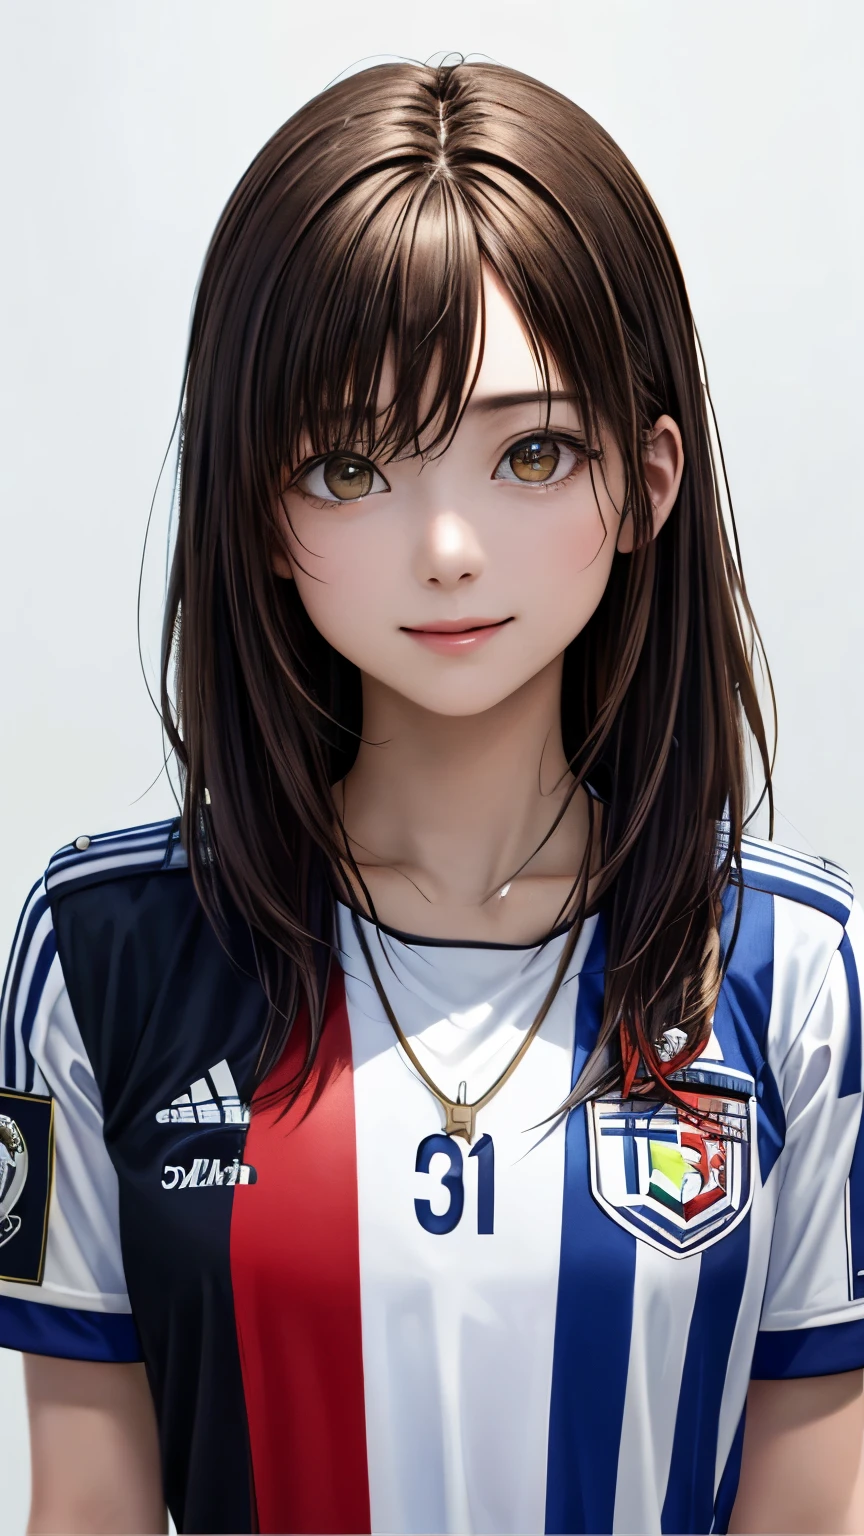 (highest quality、8k、32K、masterpiece)、(realistic)、(Photoreal:1.2)、(High resolution)、Super detailed、very beautiful face and eyes、1 girl、round and small face、thin waist、delicate body、(close、highest quality、high detail、rich skin details)、(highest quality、8k、oil paint:1.2)、Super detailed、(realistic、realistic:1.37)、bright colors、(((brown hair)))、(((bust shot)))、(((medium hair)))、(((pure white wall background)))、(((pure white wall background)))、(((White and gray stripes々wear the uniform of)))、(((laughing)))、(((Wearing a uniform with horizontal stripes)))、(((look straight ahead)))、(((brown hair)))、(((wearing a heart necklace)))、(((She is wearing a white and gray striped uniform.)))、(((her hair is tied up with a yellow ribbon)))、(((It&#39;s a soccer uniform)))